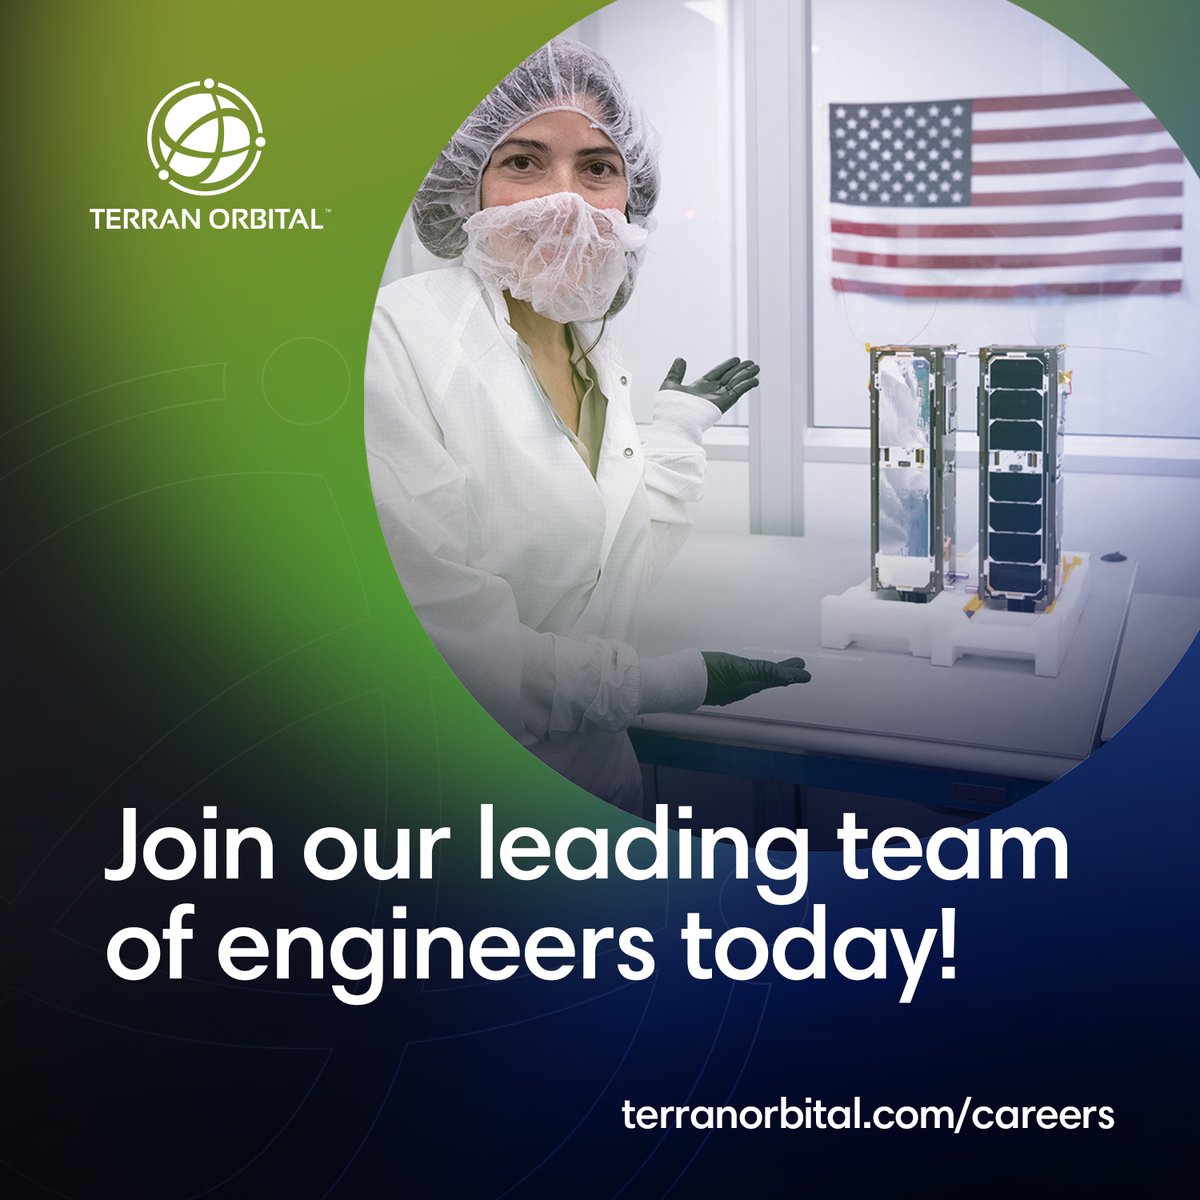 We're seeking passionate individuals who are eager to push boundaries, solve complex challenges, and pioneer the future of space exploration. Click the link to apply now! terranorbital.com/careers/ #TerranOrbital #Careers #Engineers #LLAP #Jobs #Hiring #Aerospace